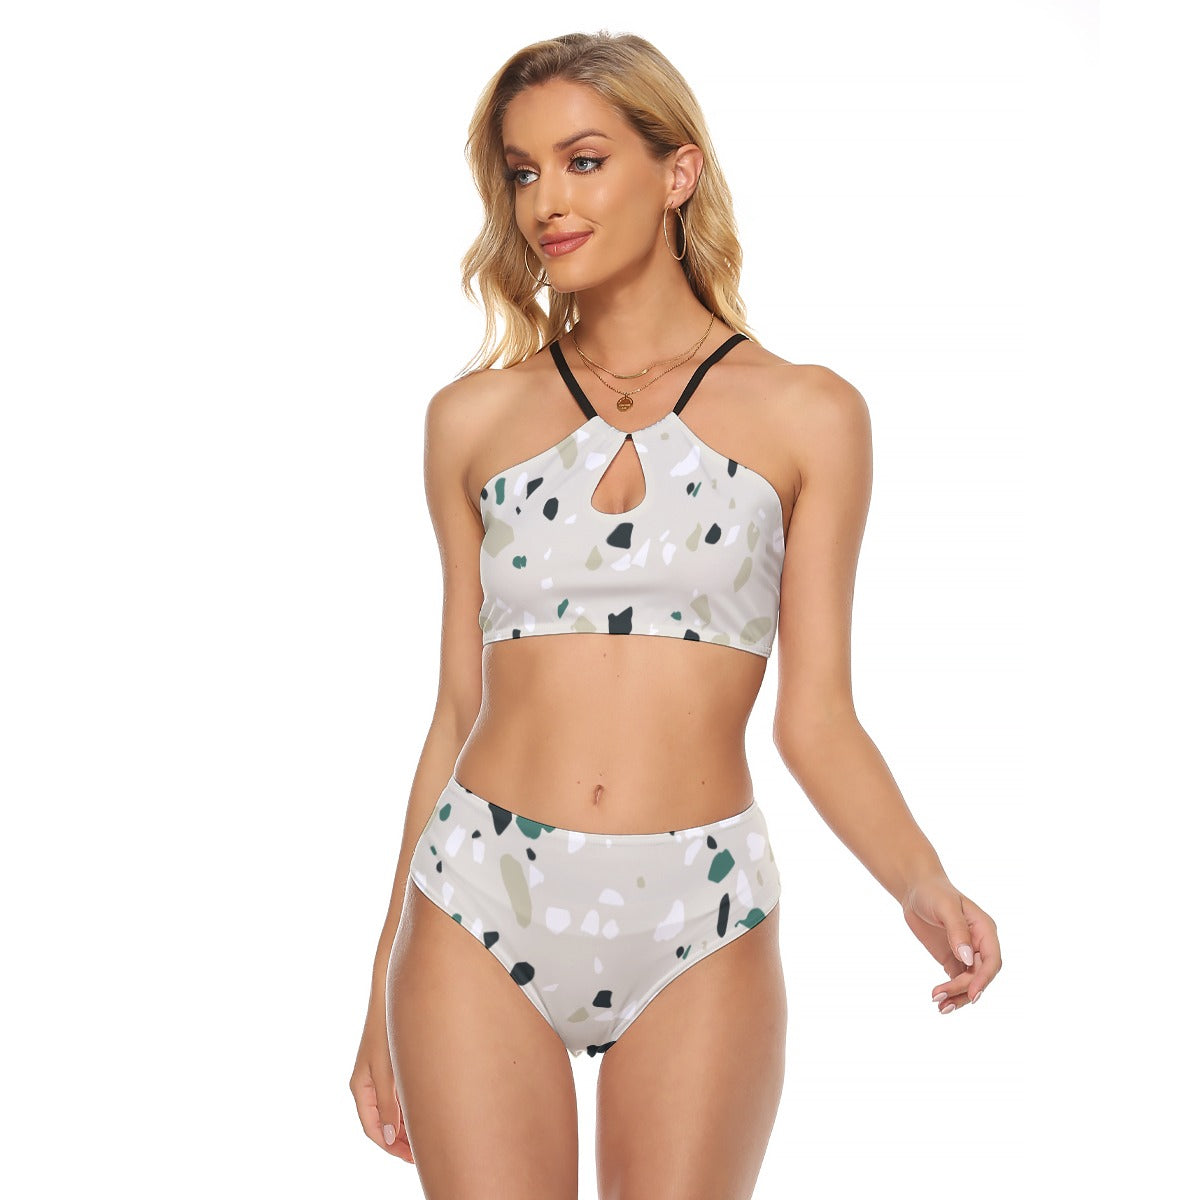 All-Over Print Women's Cami Keyhole One-piece Swimsuit